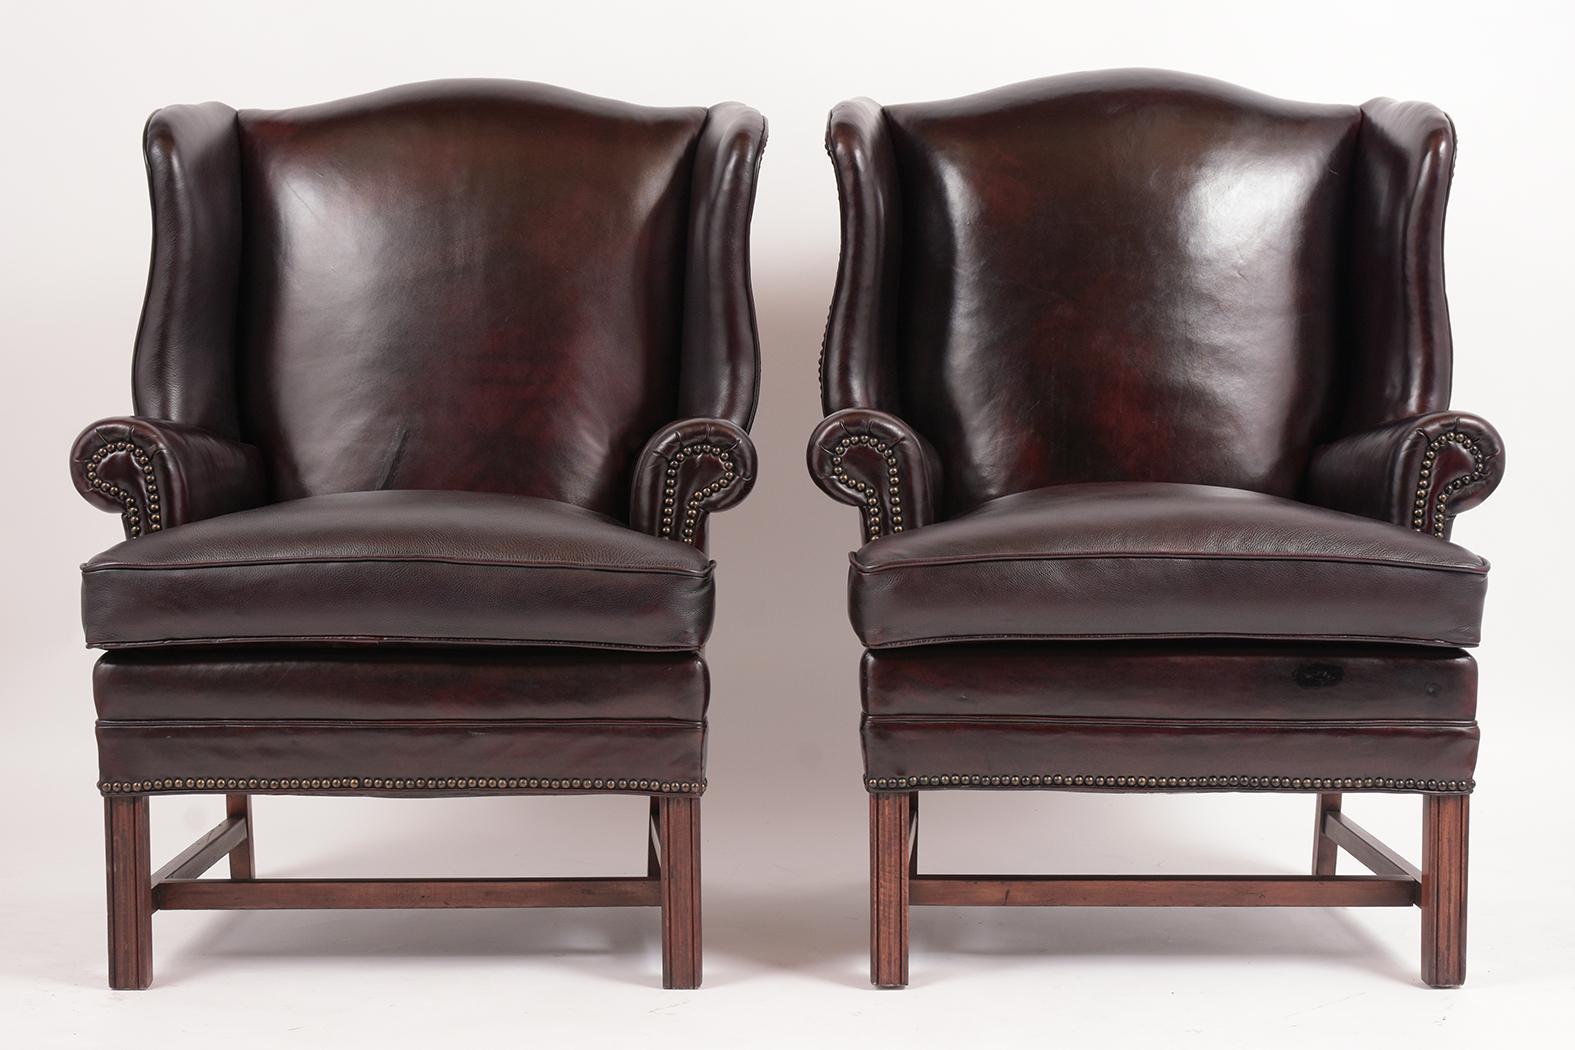 This Circa 1950s Pair of Regency Style Wing Armchair features the original leather upholstery in good condition and has been dyed in a dark Cordova color with a patina finish. This set of Armchairs also features a comfortable single cushion with